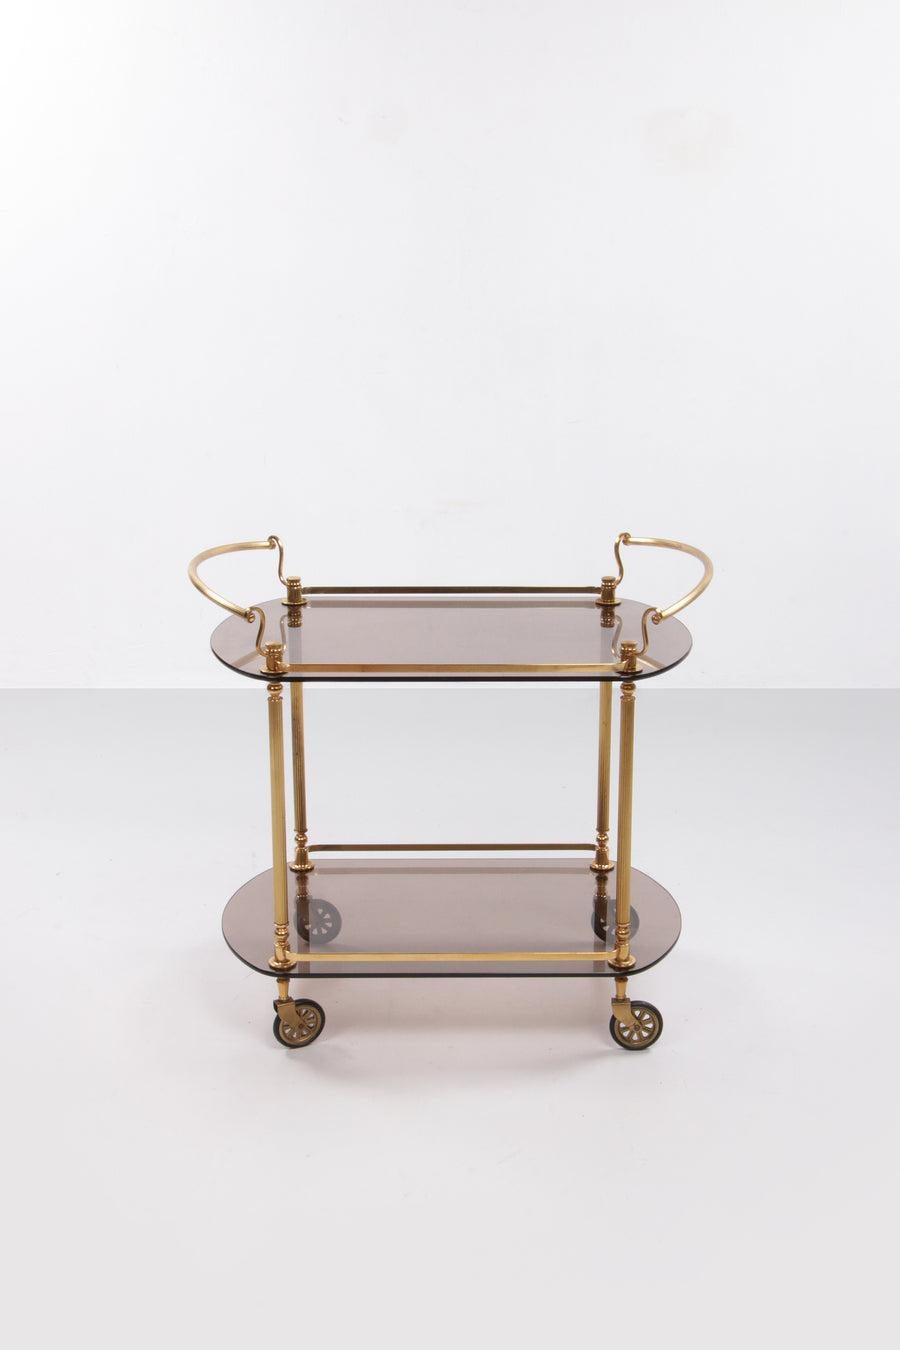 French Trolly Hollywood Regency Style with Smoked Glass 1960s.

You'll make a splash with this stylish French drinks trolley. 

Typical design for the 60s, combines perfectly in both a modern and vintage interior.

Country of origin: France

The